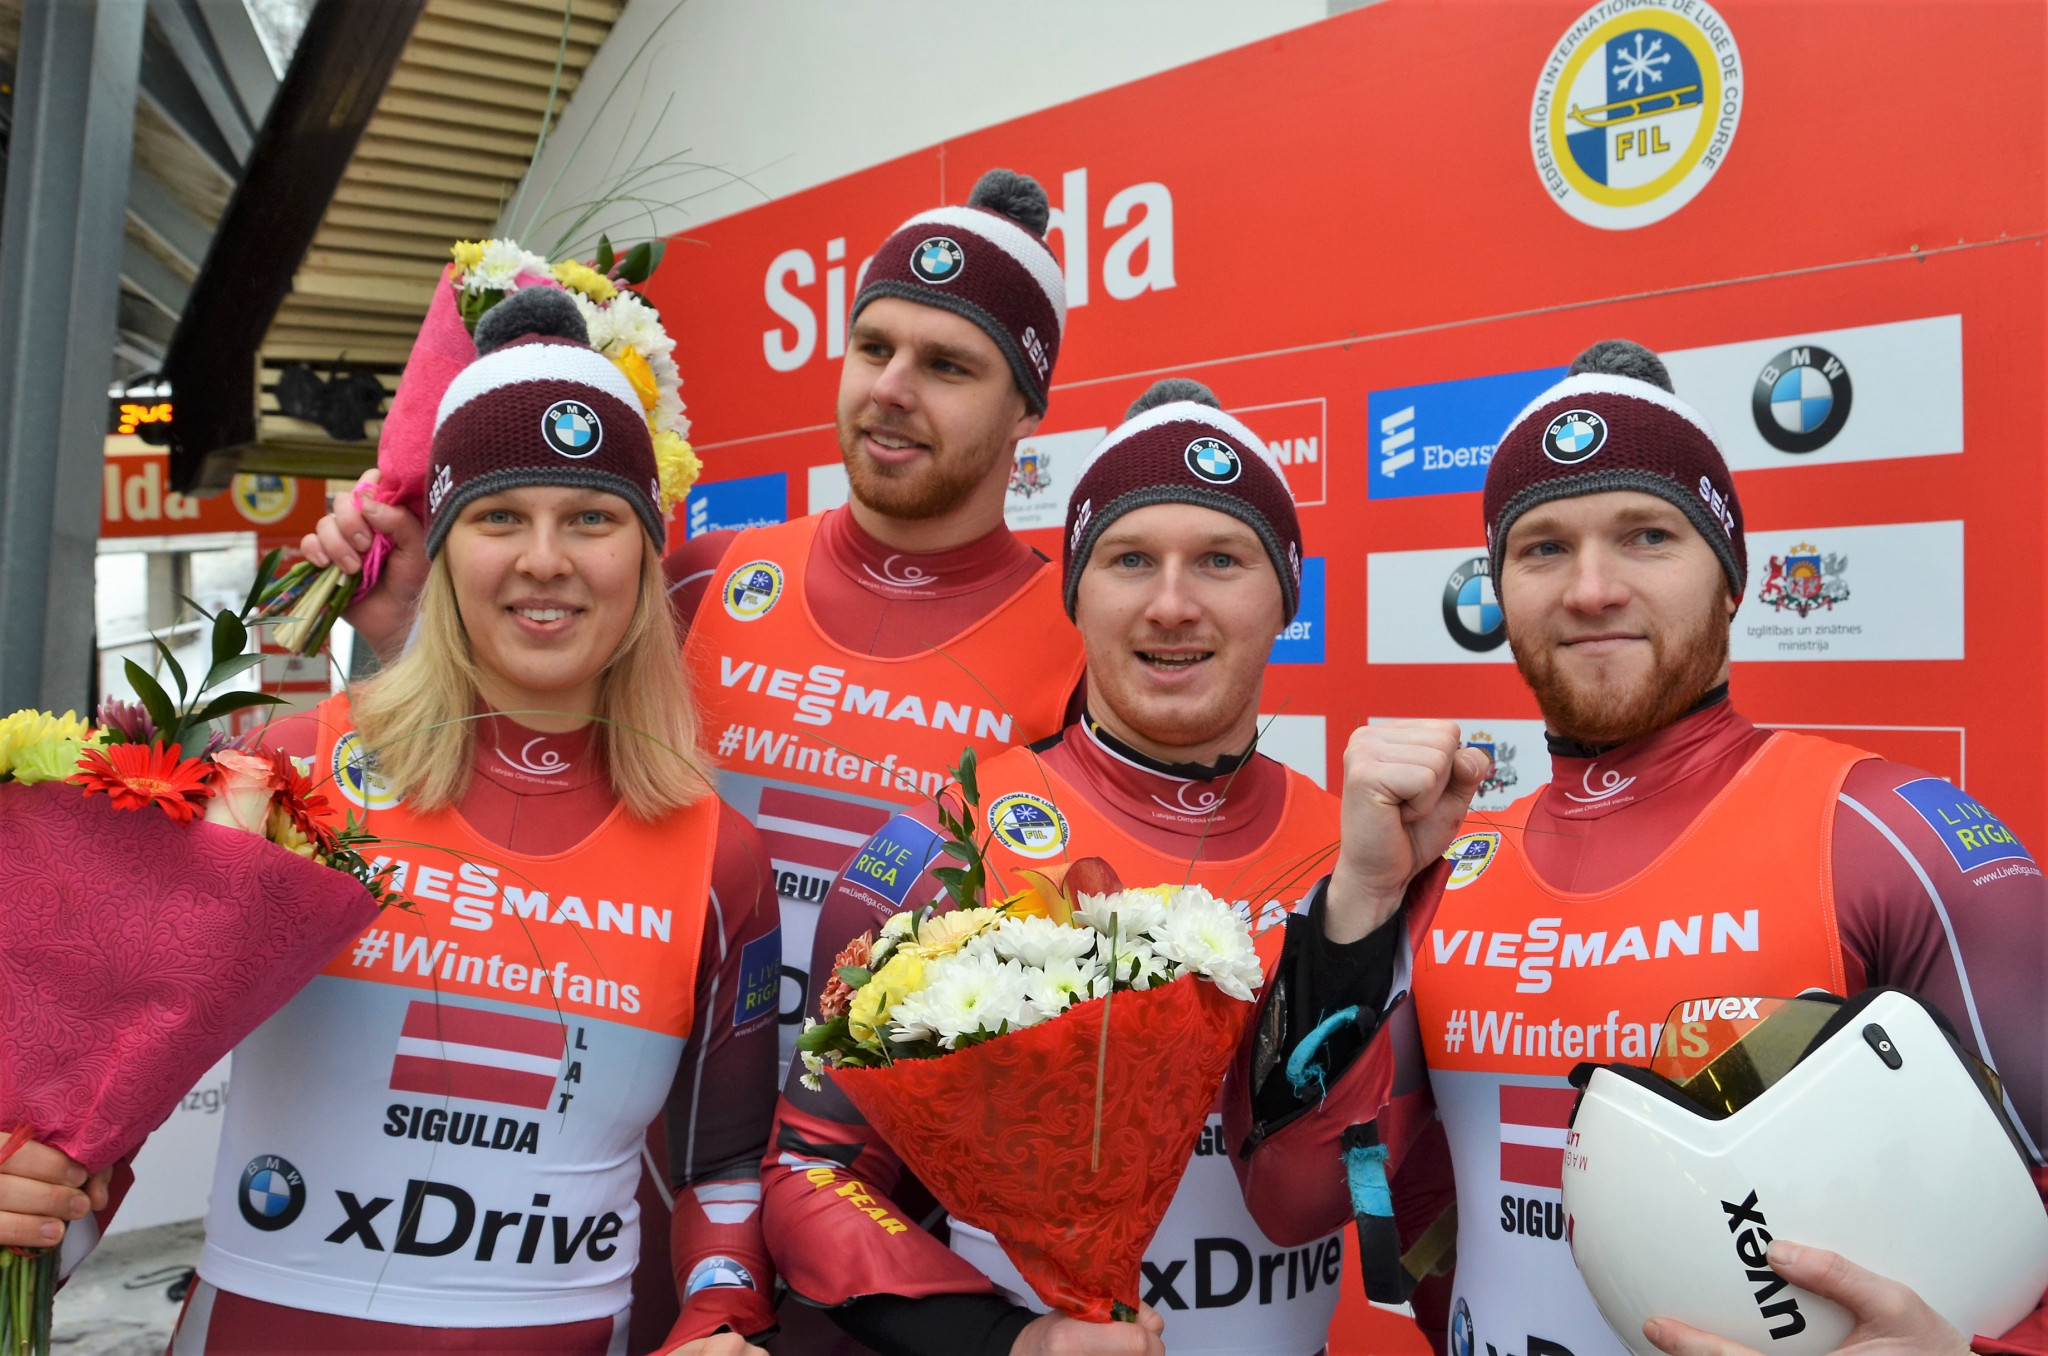 Latvia's relay team of Kendija Aparjode, Kristers Aparjods, Oskars Gudramovics and Peteris Kalnins delighted the crowd in Sigulda by winning the World Cup event today ©FIL